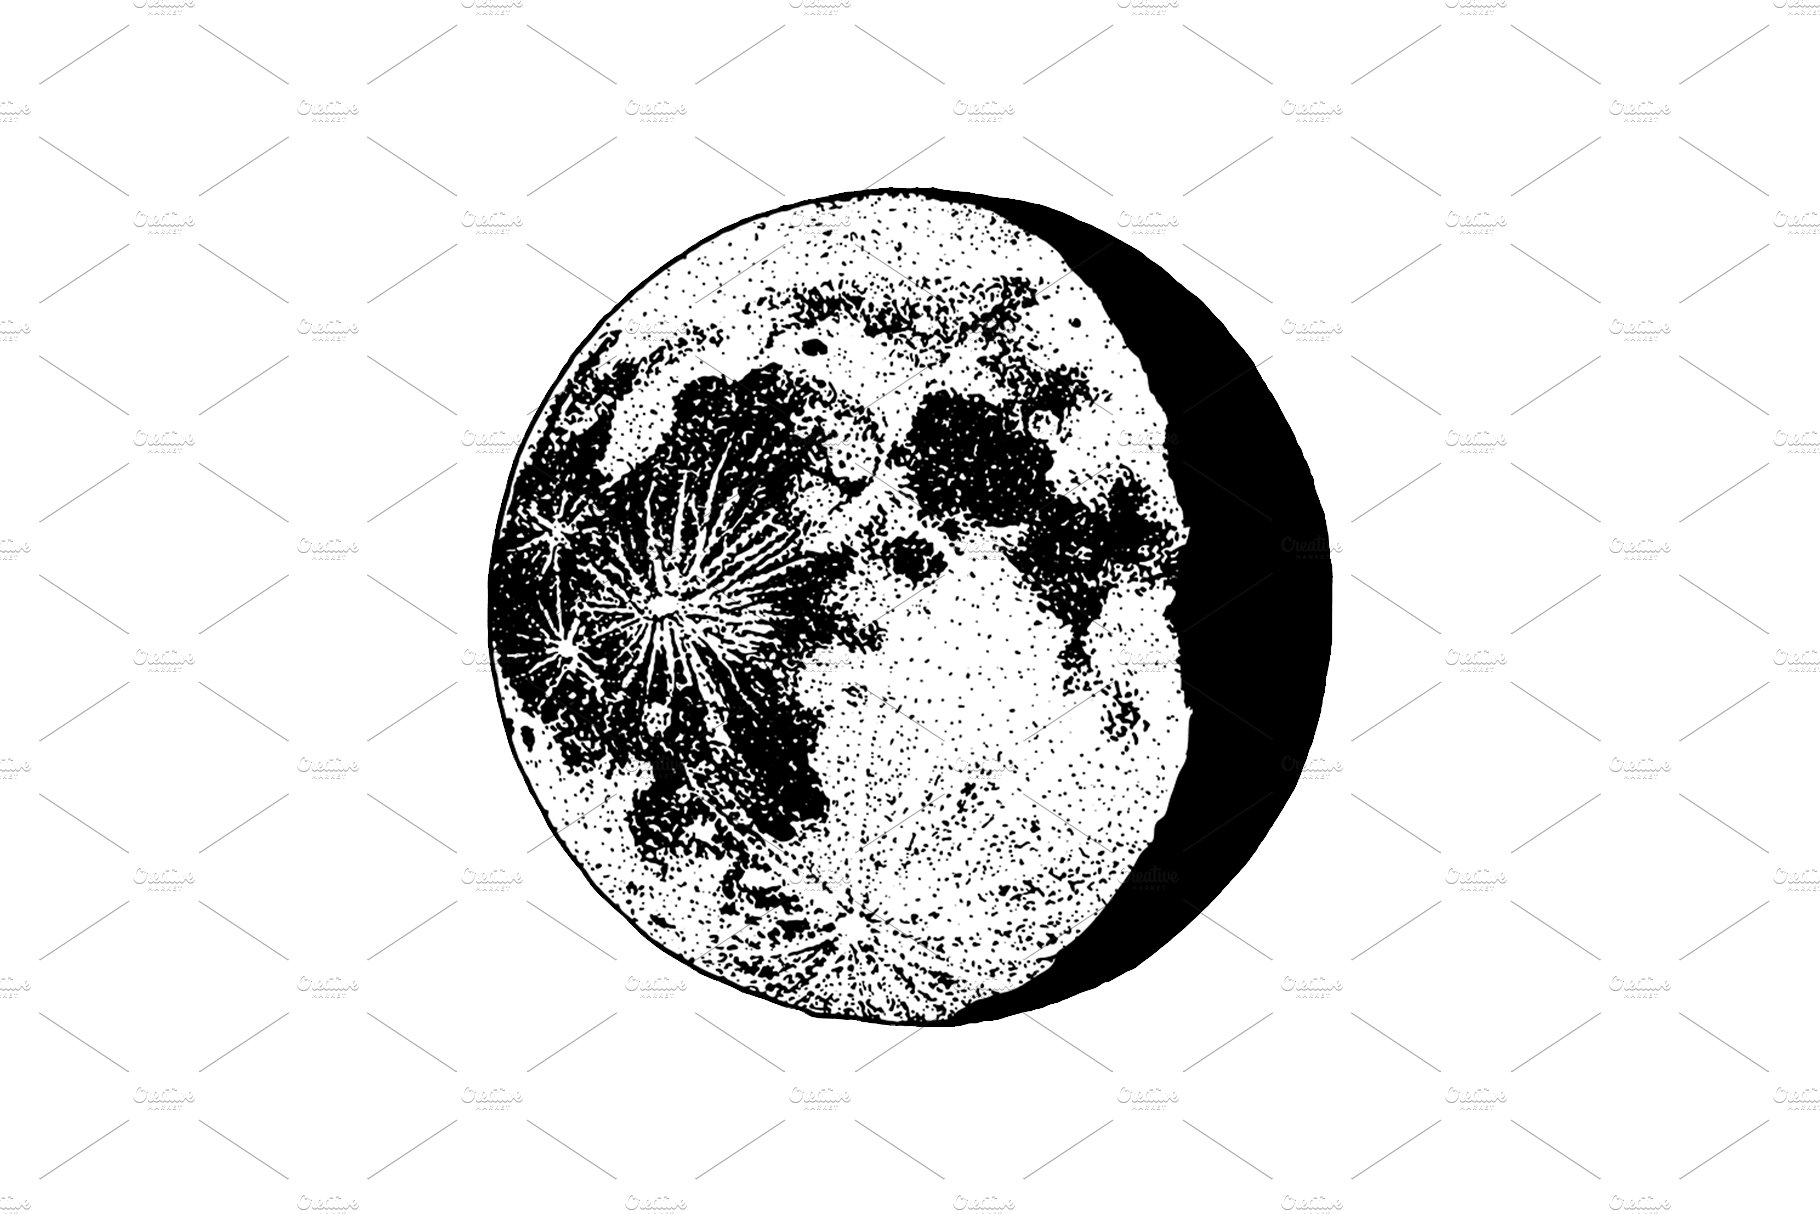 Moon phases 8 steps / Astronomy set preview image.